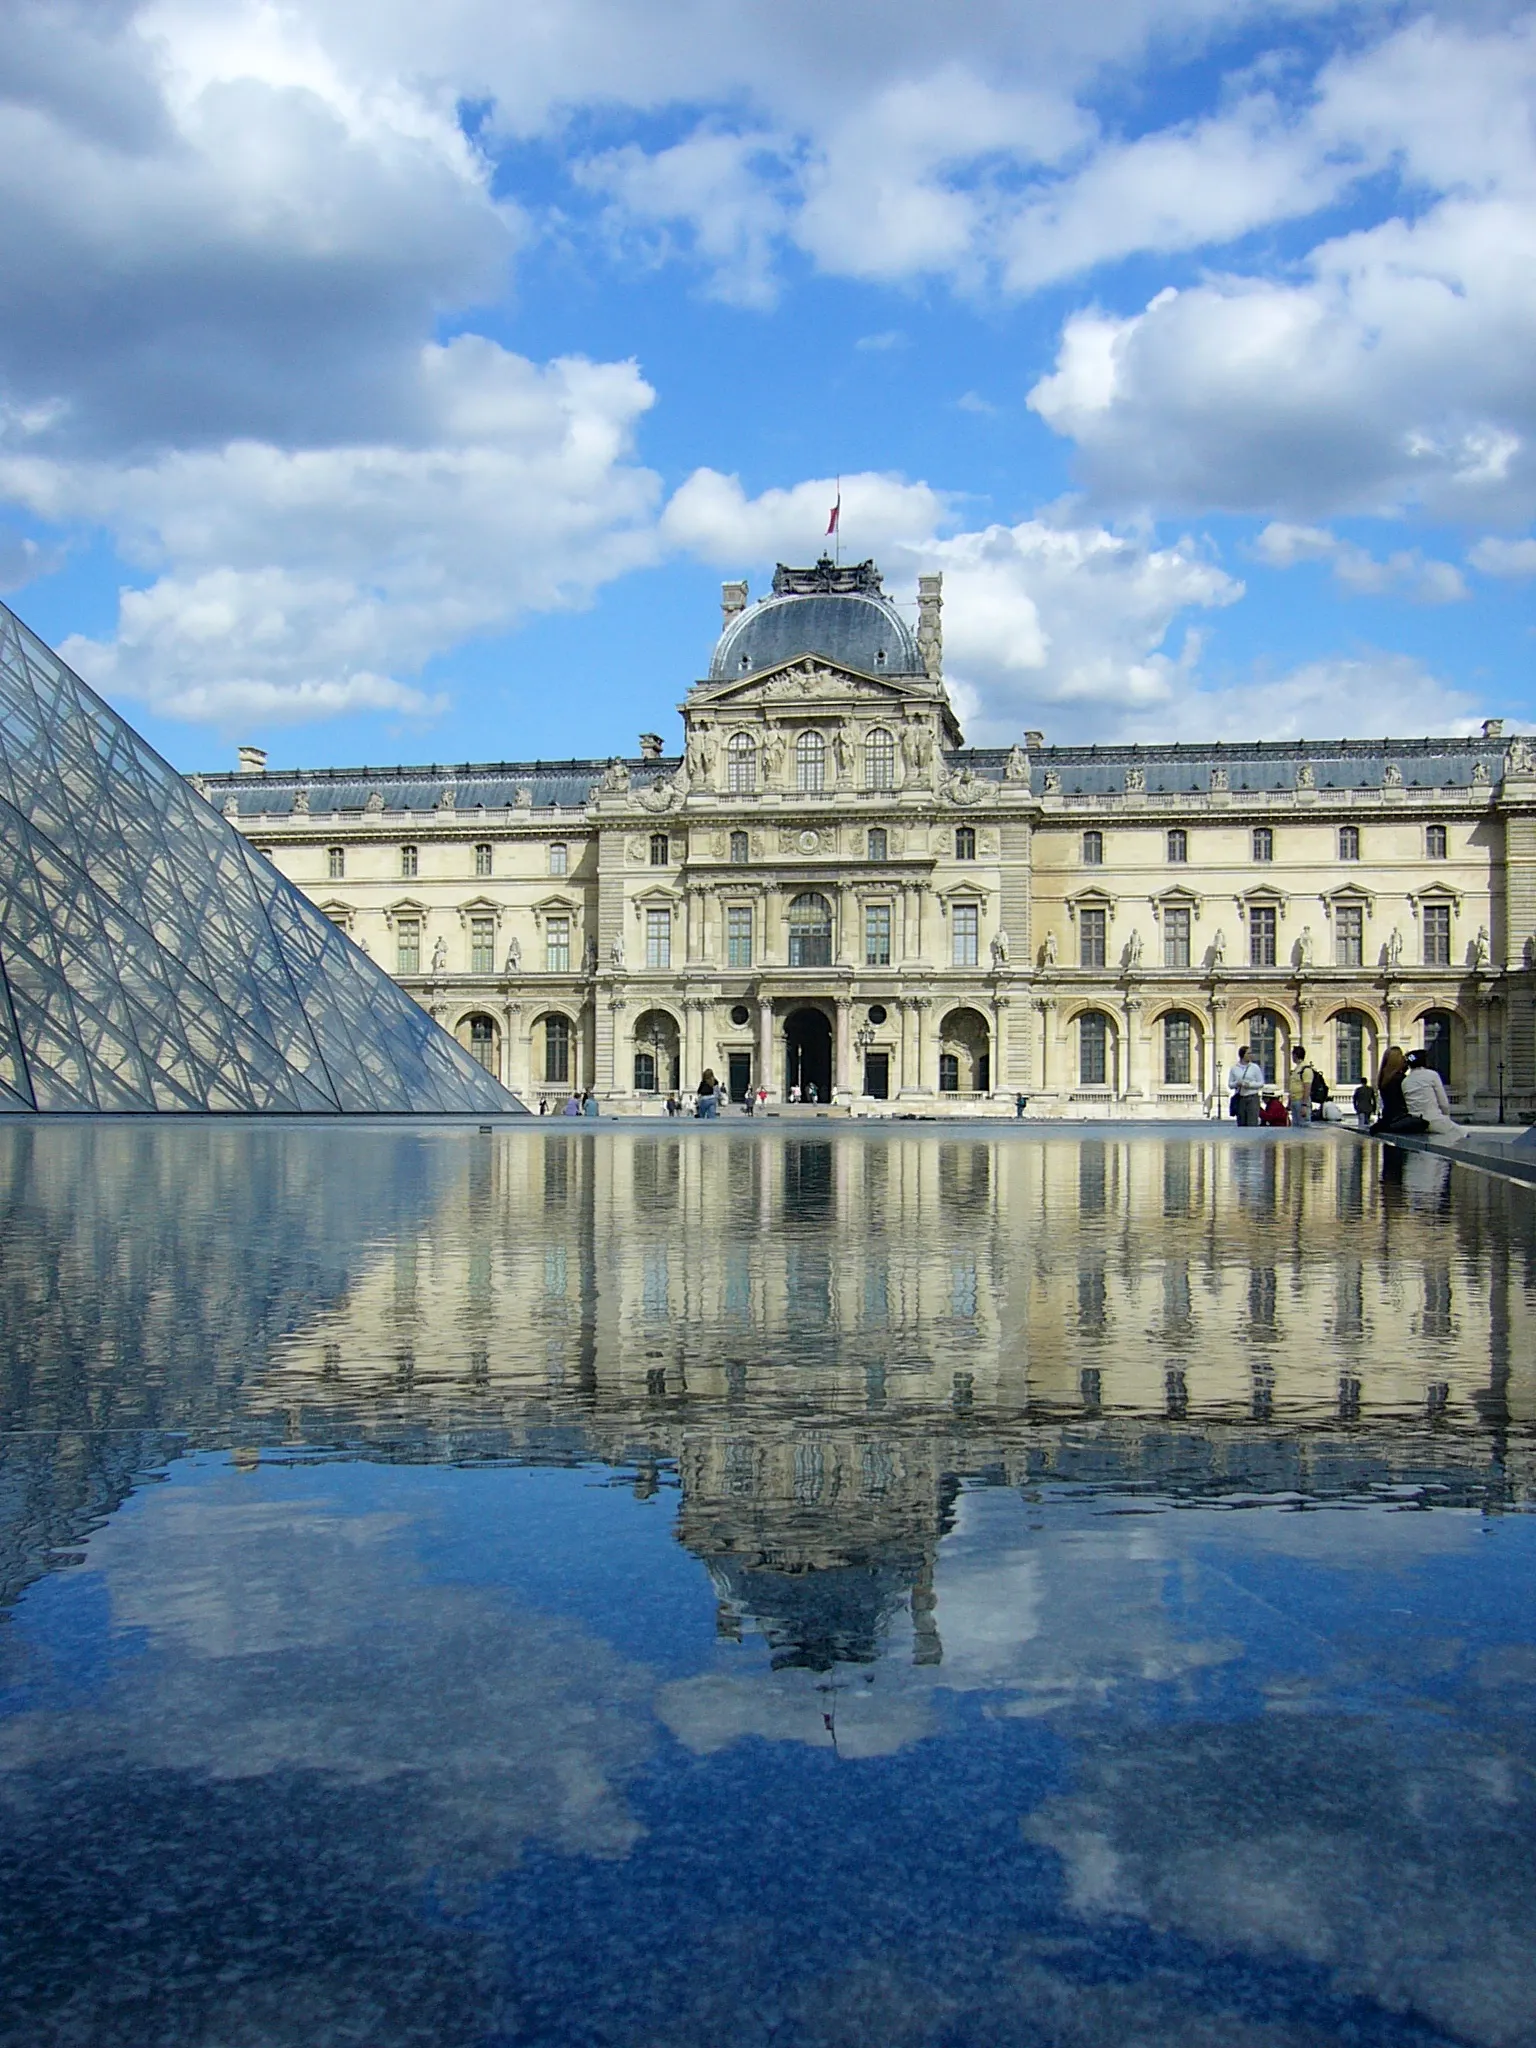 Photo showing: The Louvre palace (Sully wing; with a part of the Pyramid on the left) in Paris